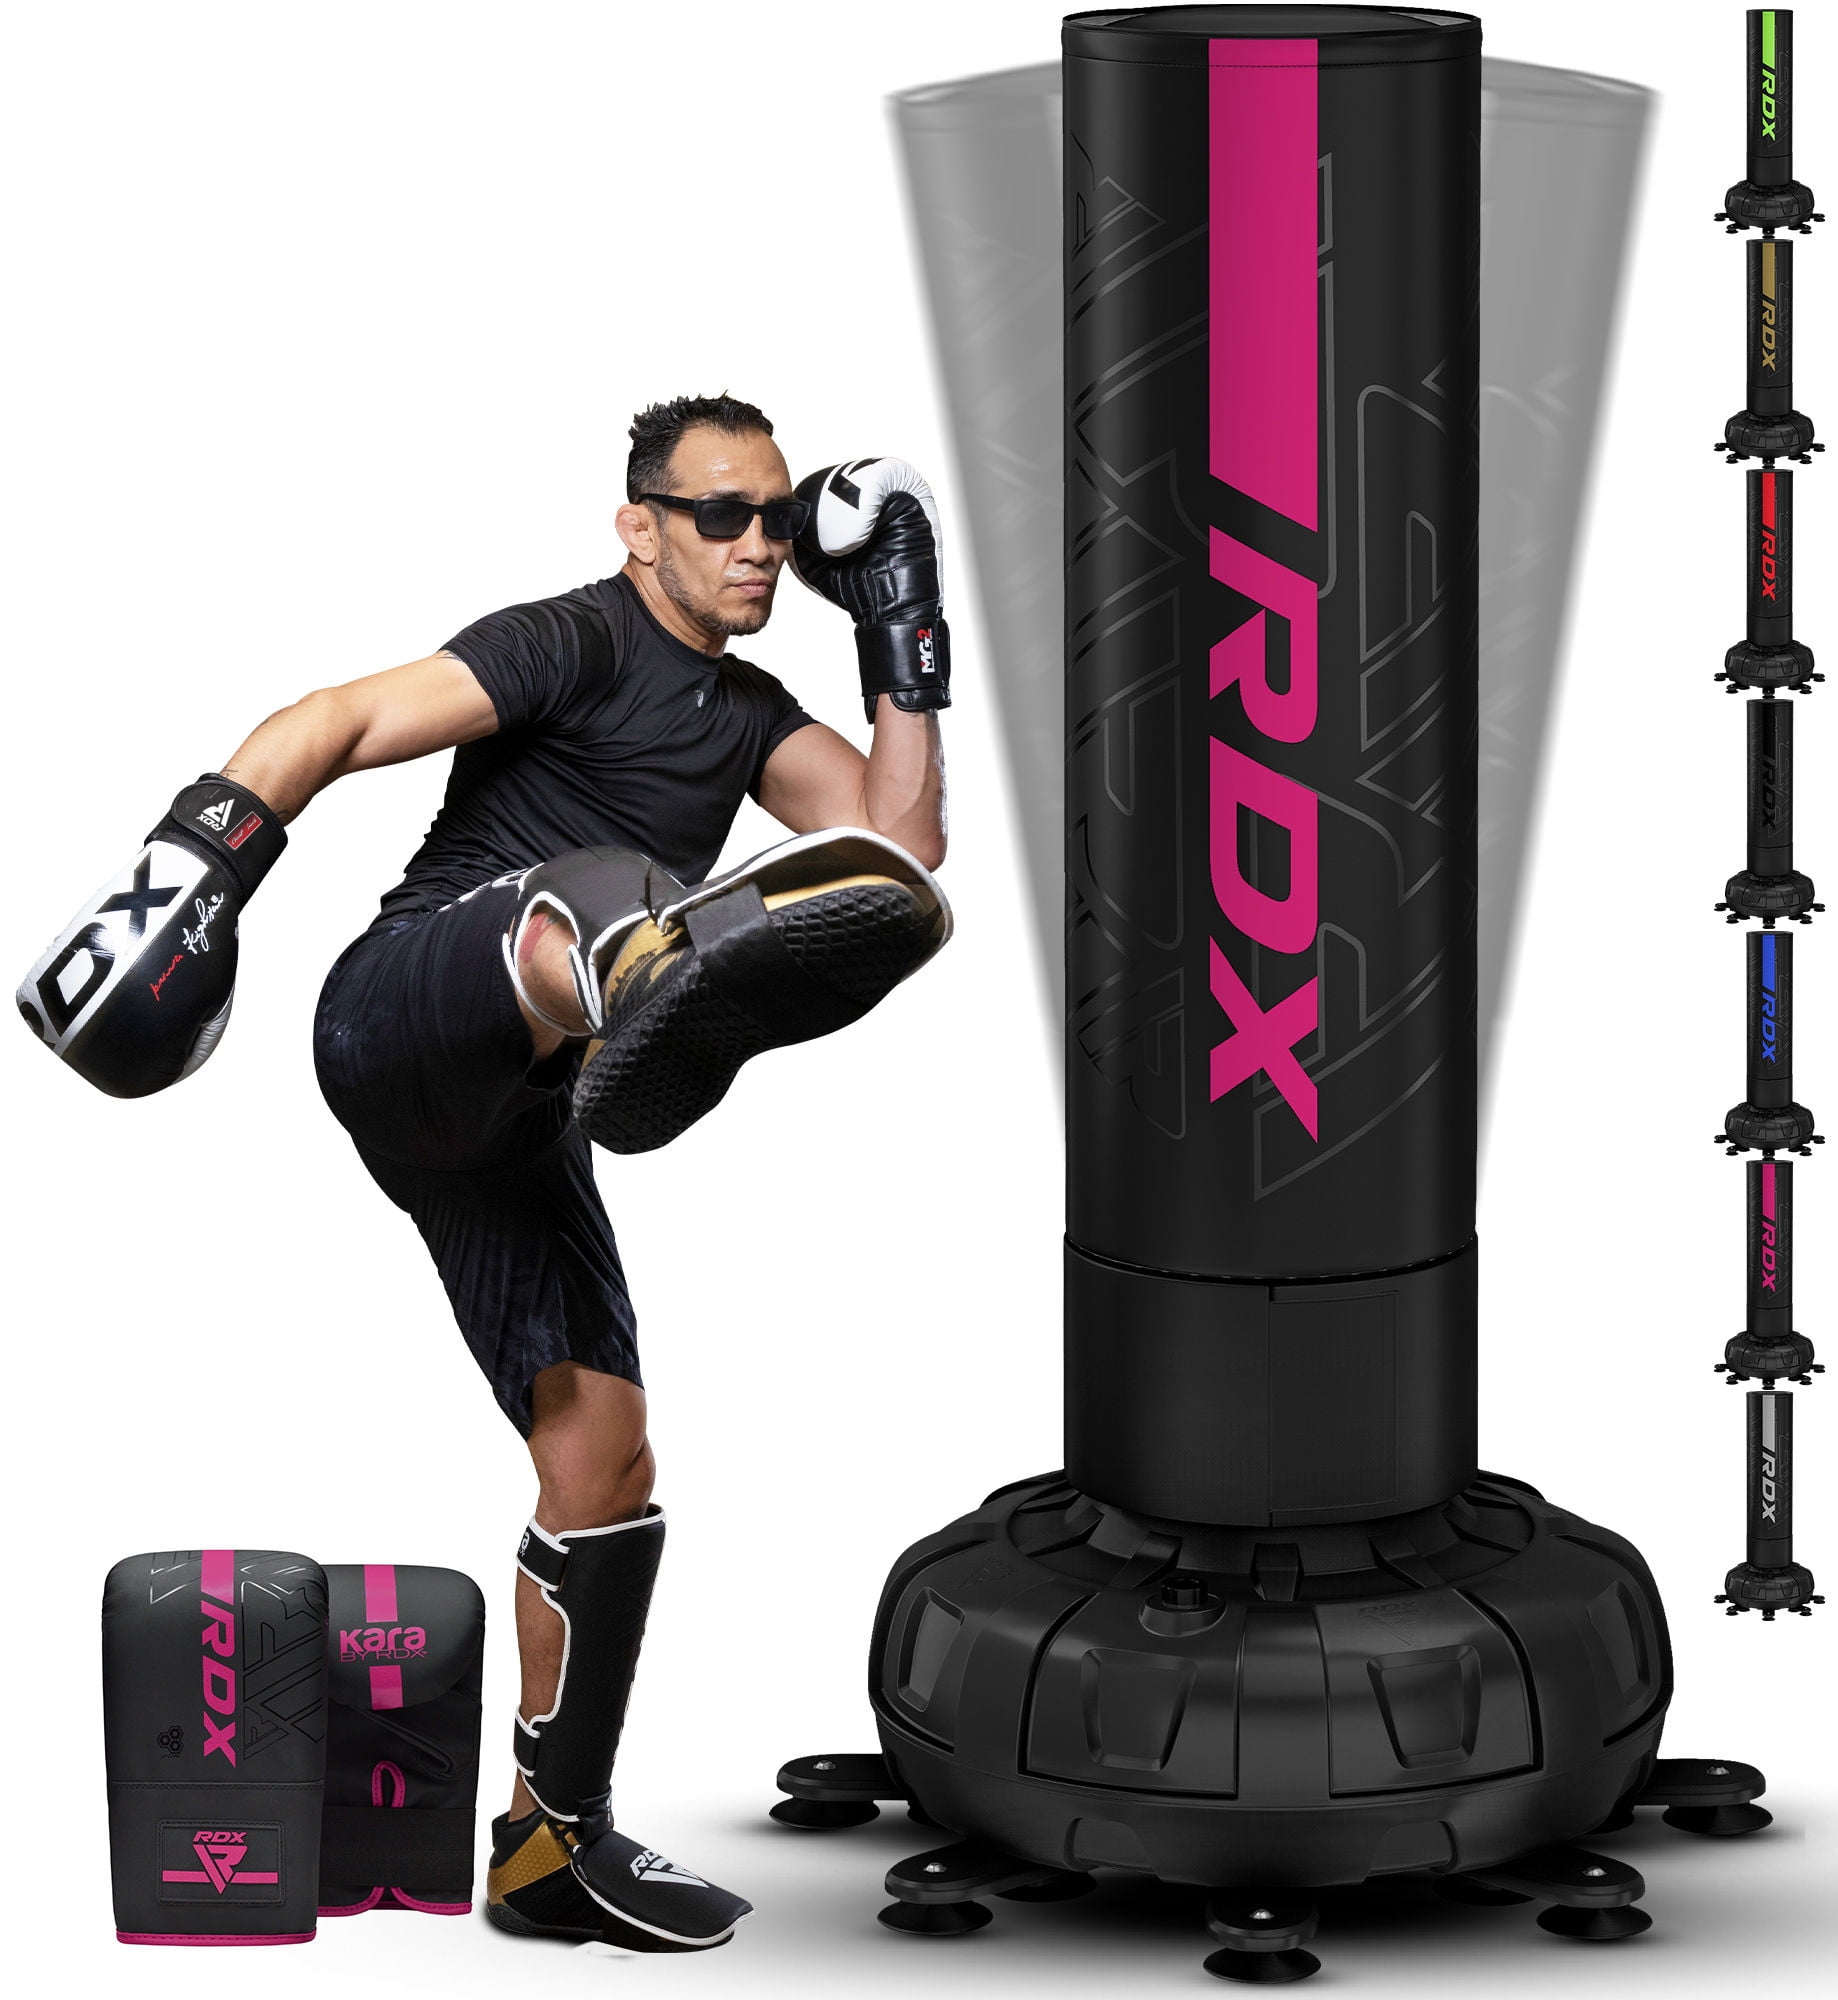 RDX Freestanding Punching Bag Gloves 73 6ft XXL Heavy Duty Adult Pedestal Bag 17 Suction Cup Stand Base Free Standing Kickboxing Boxing MMA Muay Thai d446581f 6403 4dd6 93a9 6ac72225f61d.57048d00875dec16abbad1c5a26527cc